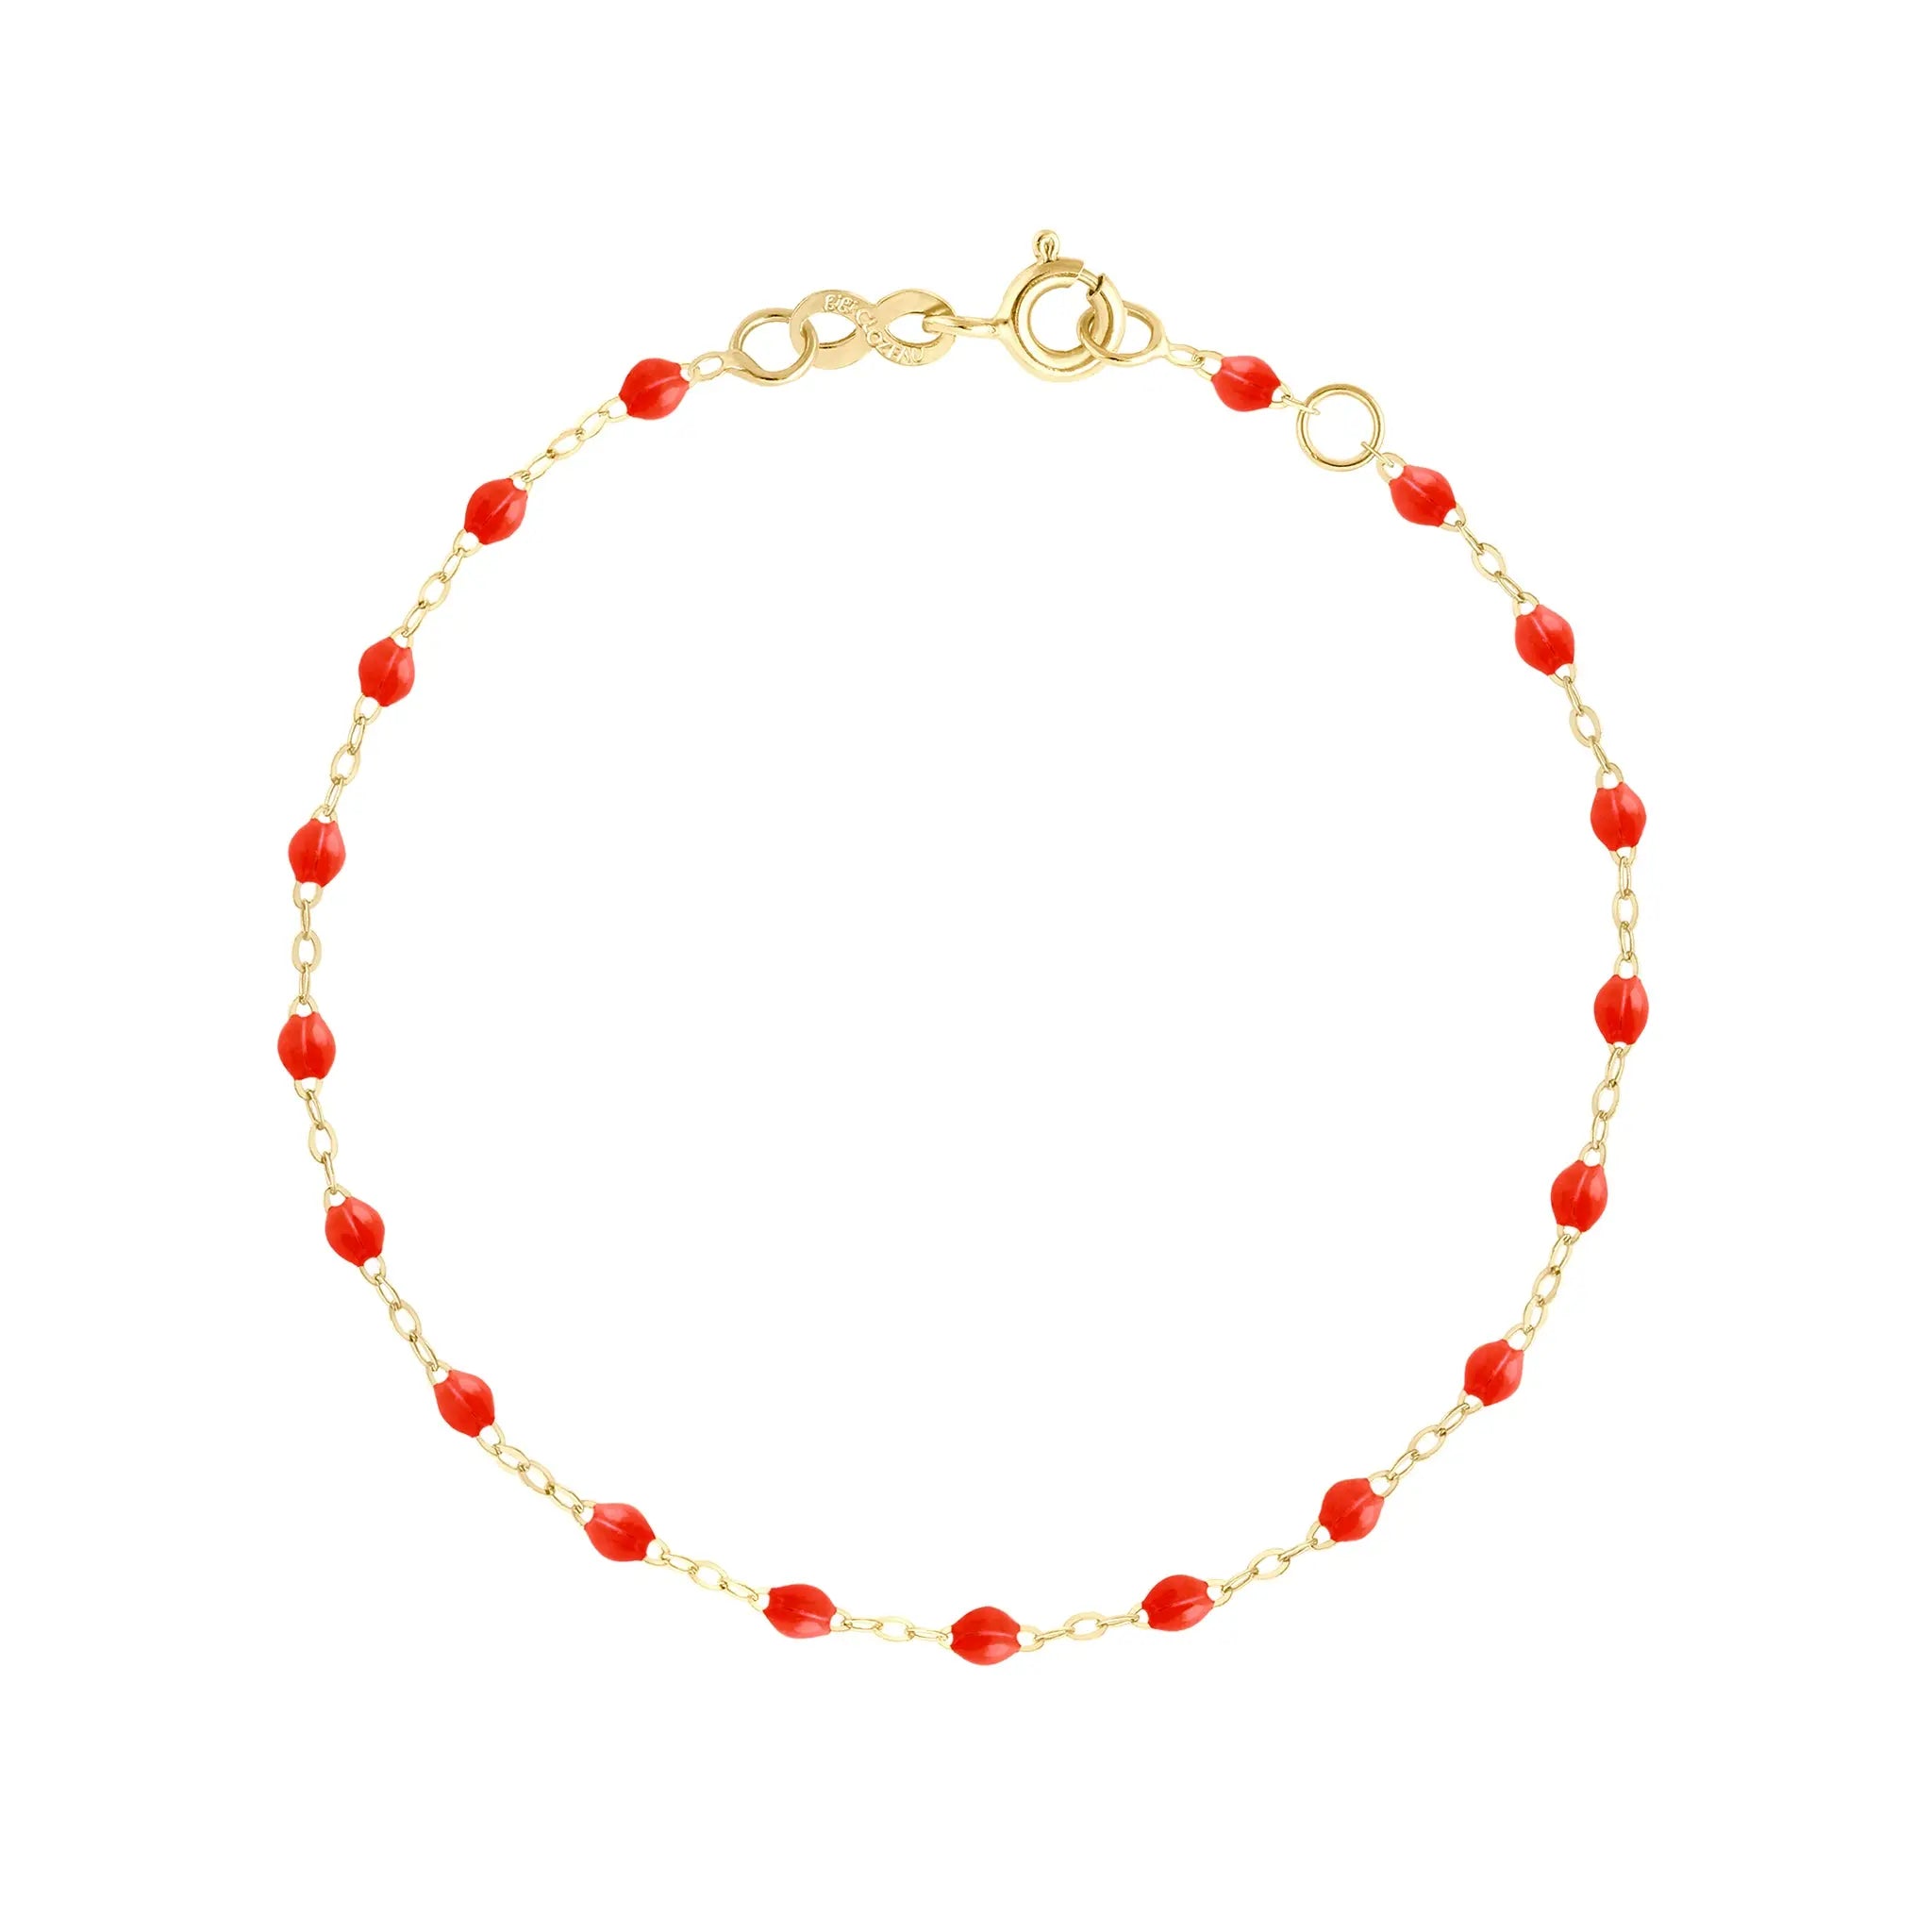 The Classic Gigi bracelet by gigi CLOZEAU features 18K Yellow Gold, and unique Coral jewels for a simple, everyday look.   Each jewel is unique, artisanally made in their family-owned workshop. 18K yellow gold and resin. The bracelet measures 6.7 inches with adjustable clasp at 6.3 inches.